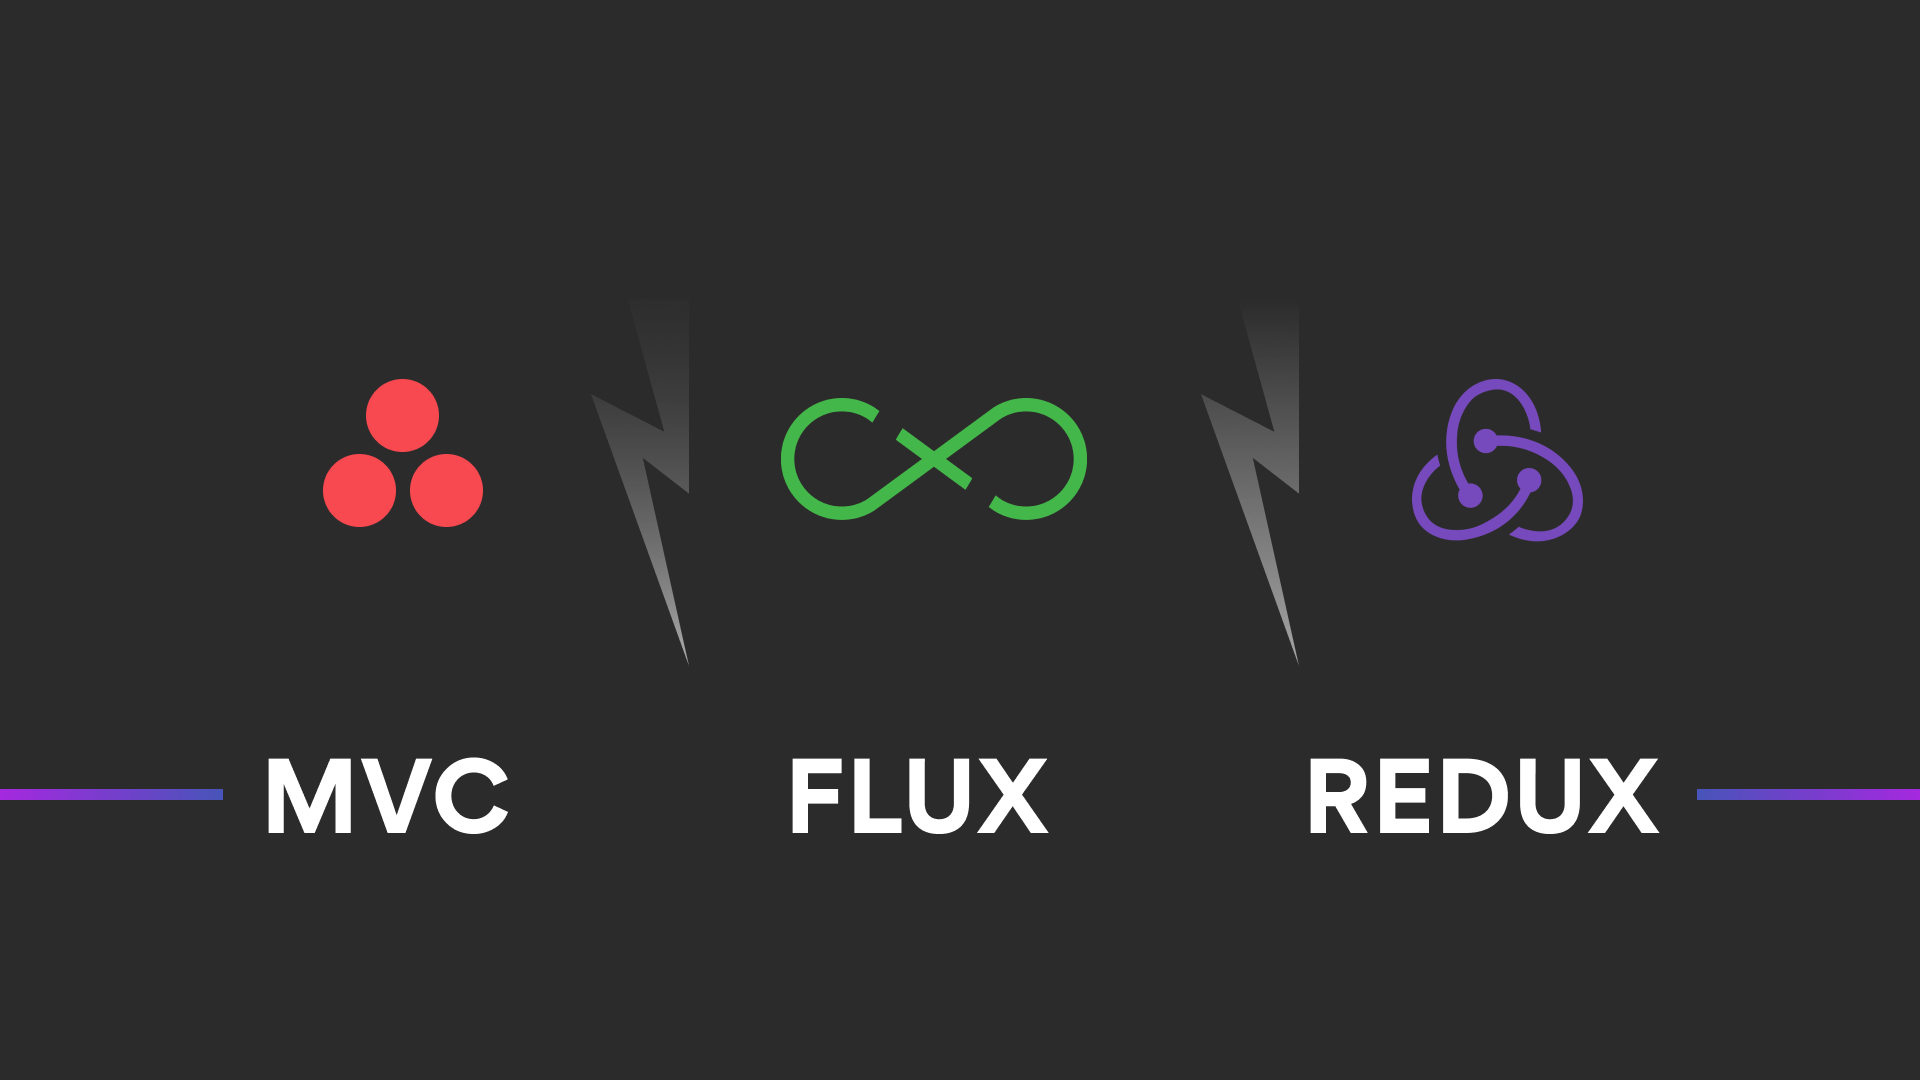 Difference between Flux, Redux, and MVC architecture